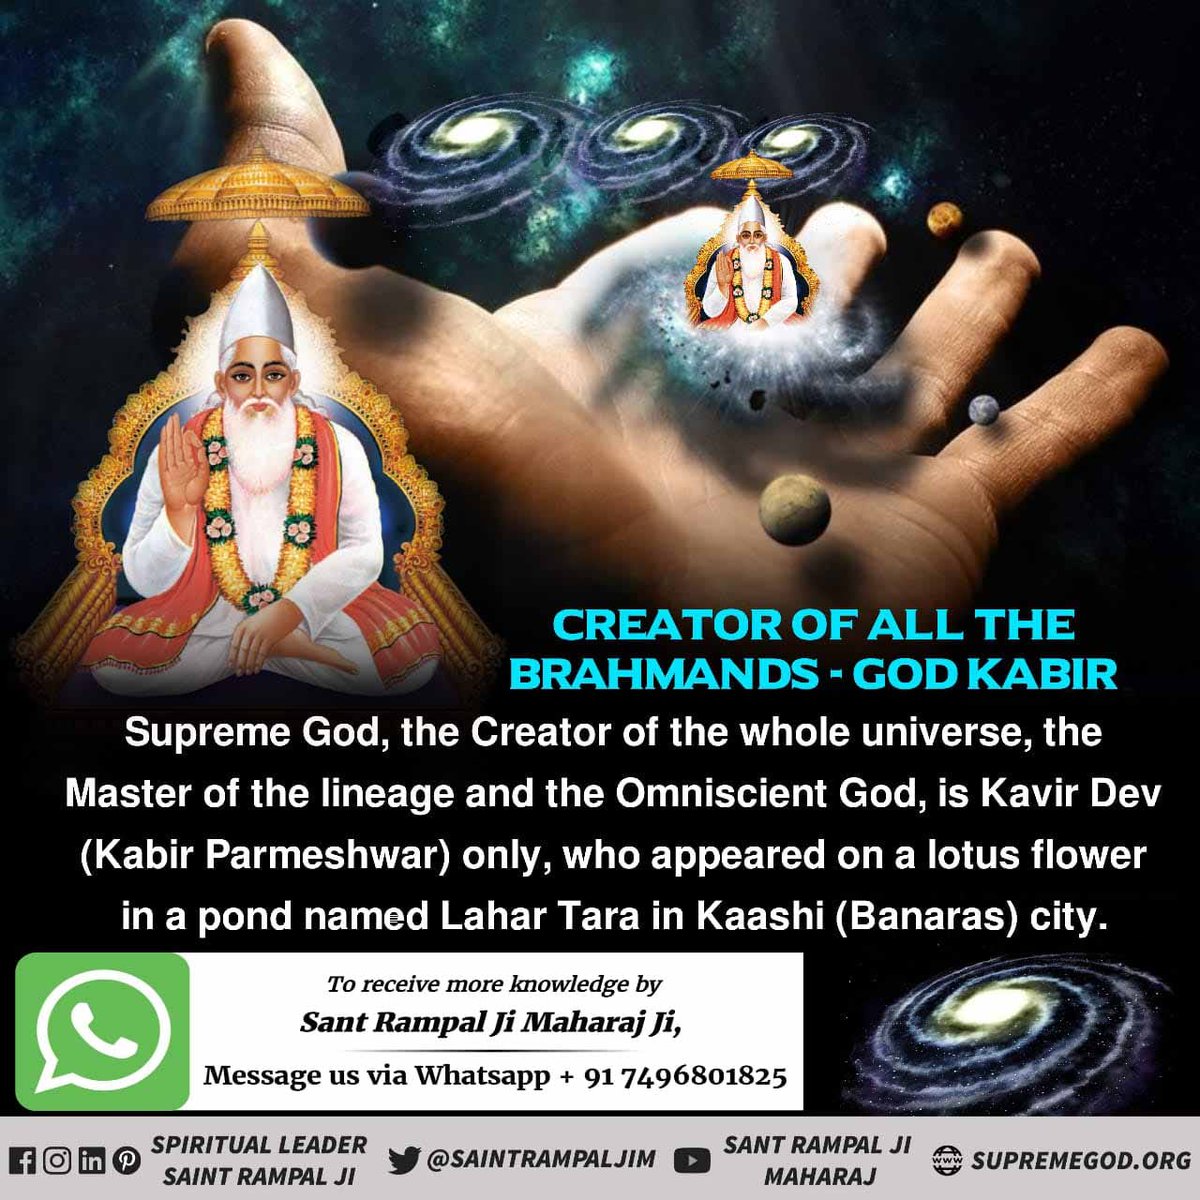 #अविनाशी_परमात्मा_कबीर
God Kabir, Himself comes as His messenger and Himself delivers His sound knowledge (True Tattavgyan). This is also supported by the holy scriptures ie. pious Vedas, pious Quran Sharif, holy Bible, pious Guru Granth Sahib.
Sant Rampal Ji Maharaj
🙏🙏